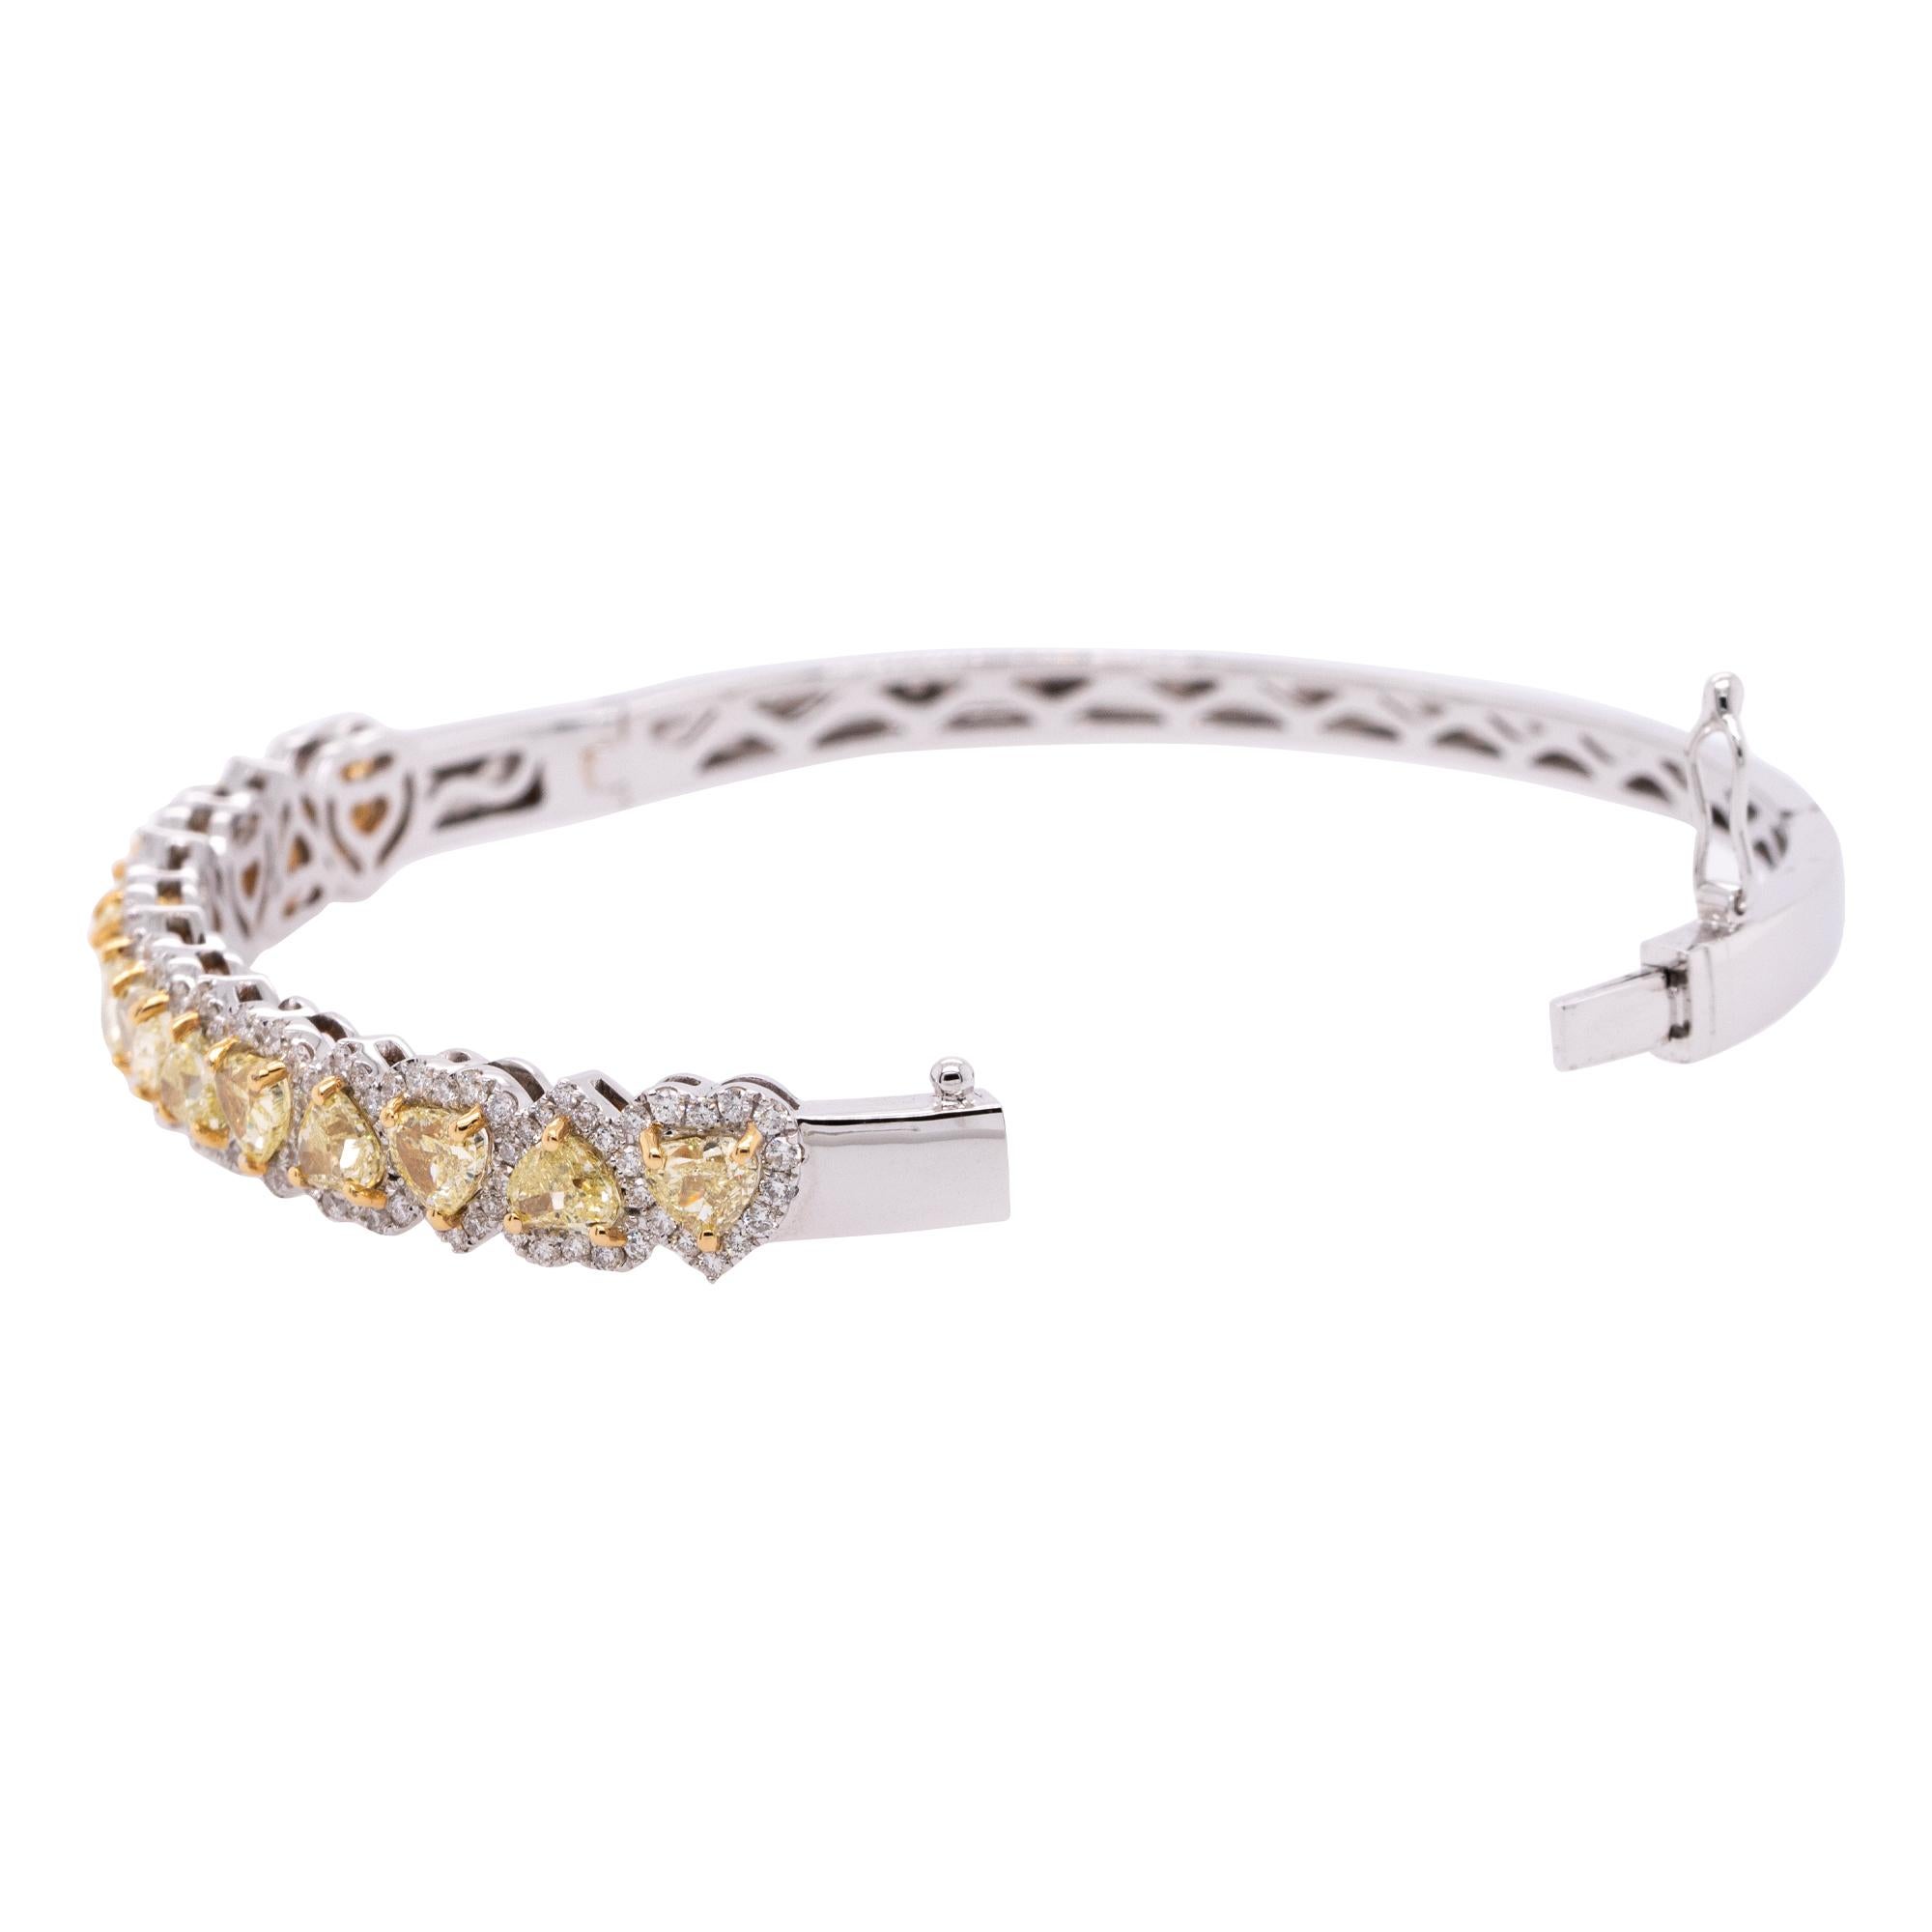 5.56 Carat Natural Fancy Heart & Round Cut Diamond Pave Bangle For Sale 2